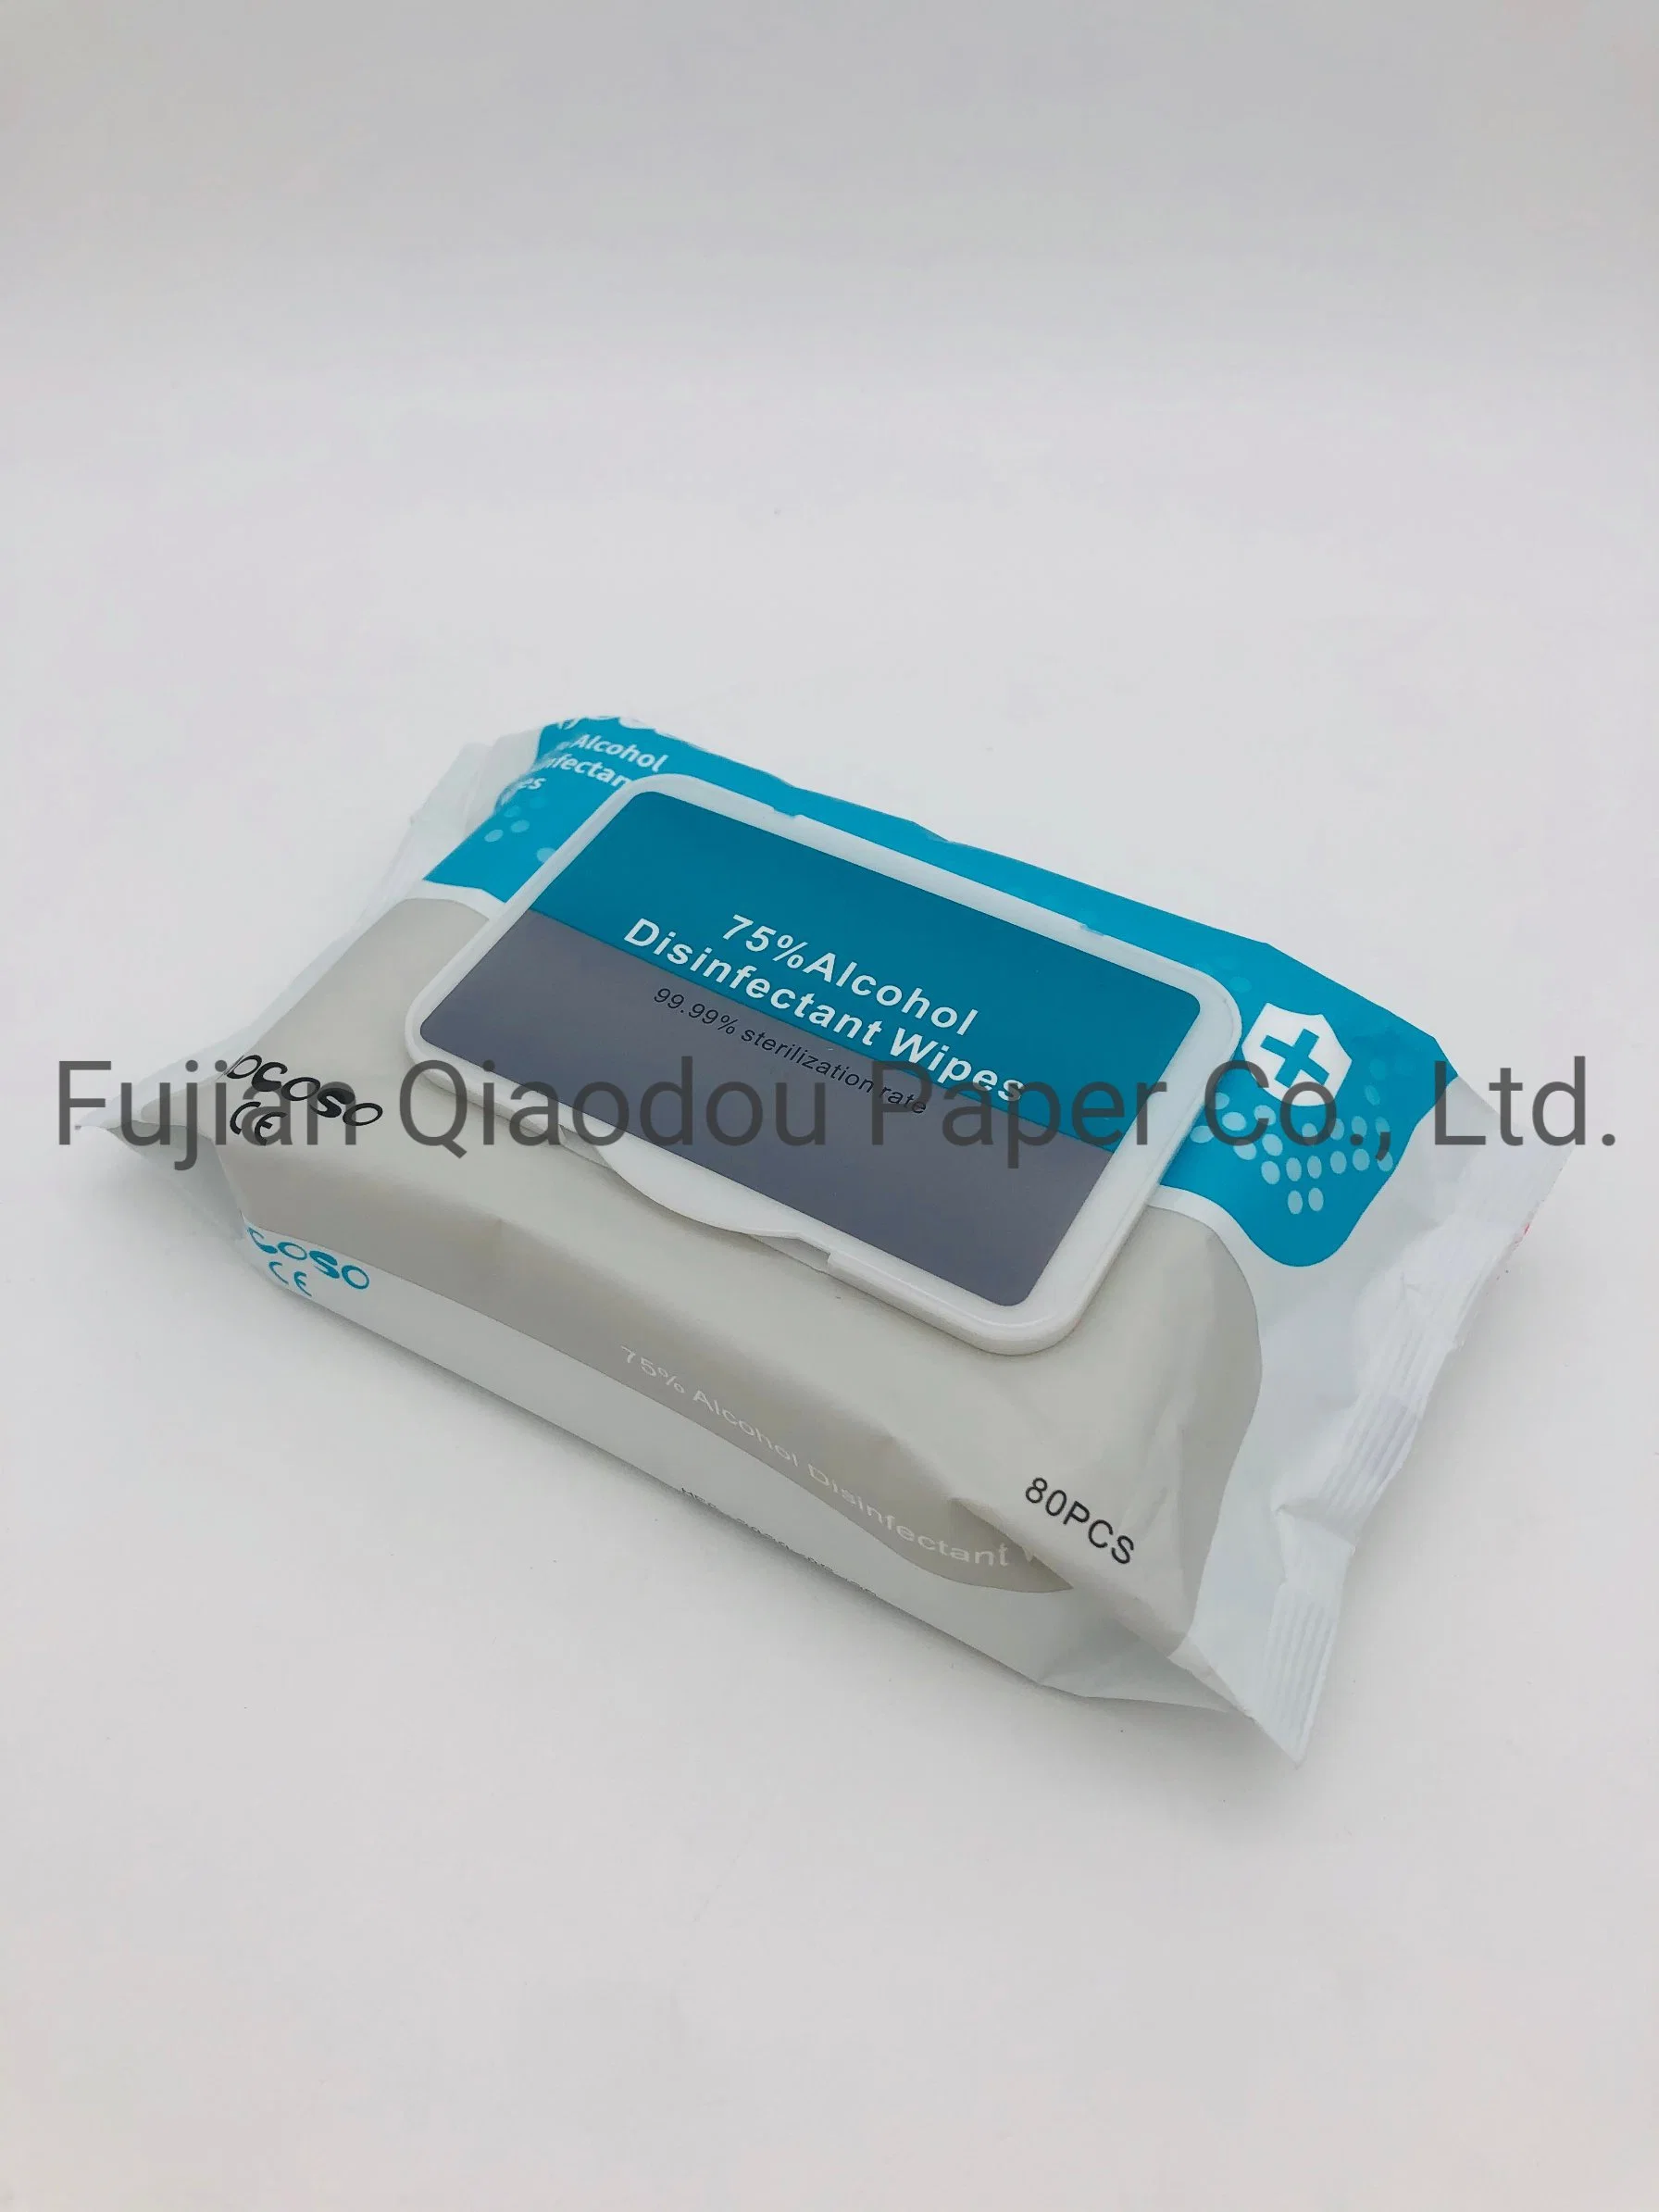 Qiaodou Anti Bacterial 75% Alcohol Antibacterial Hand Sanitizing Disinfectant Water Wet Wipes Non Woven Wipes